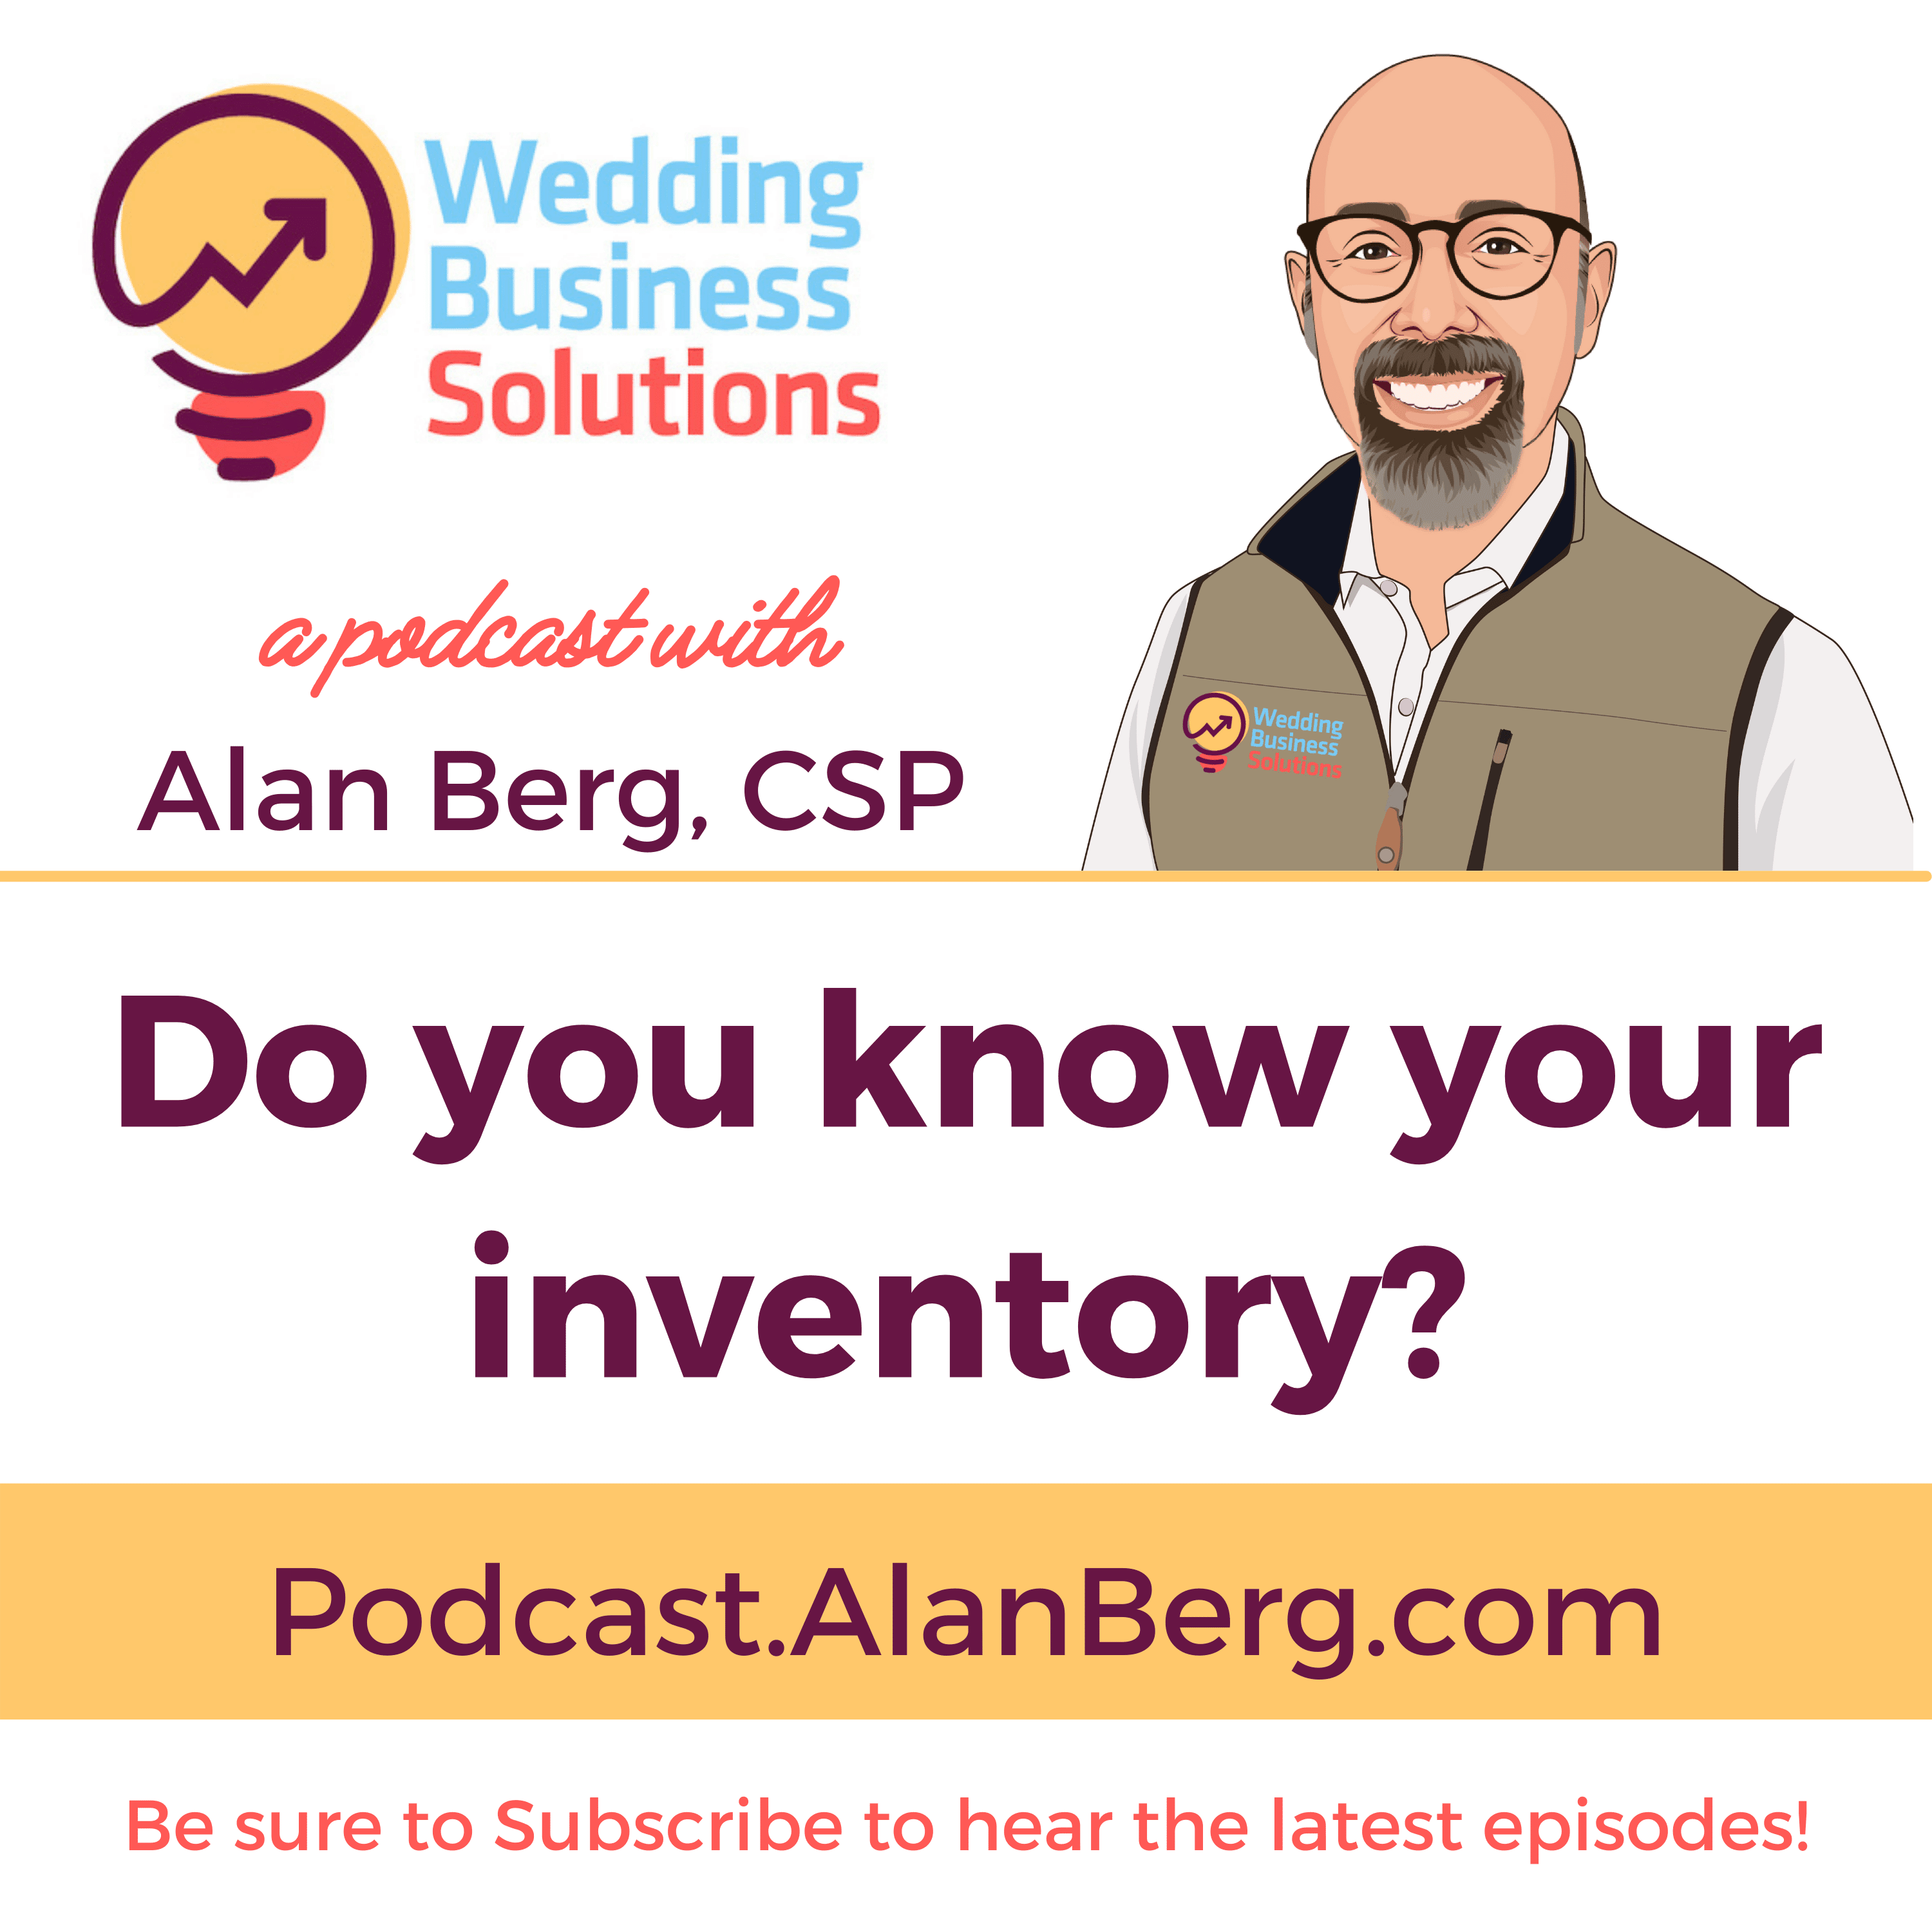 Do you know your inventory? - Alan Berg CSP, Wedding Business Solutions Podcast